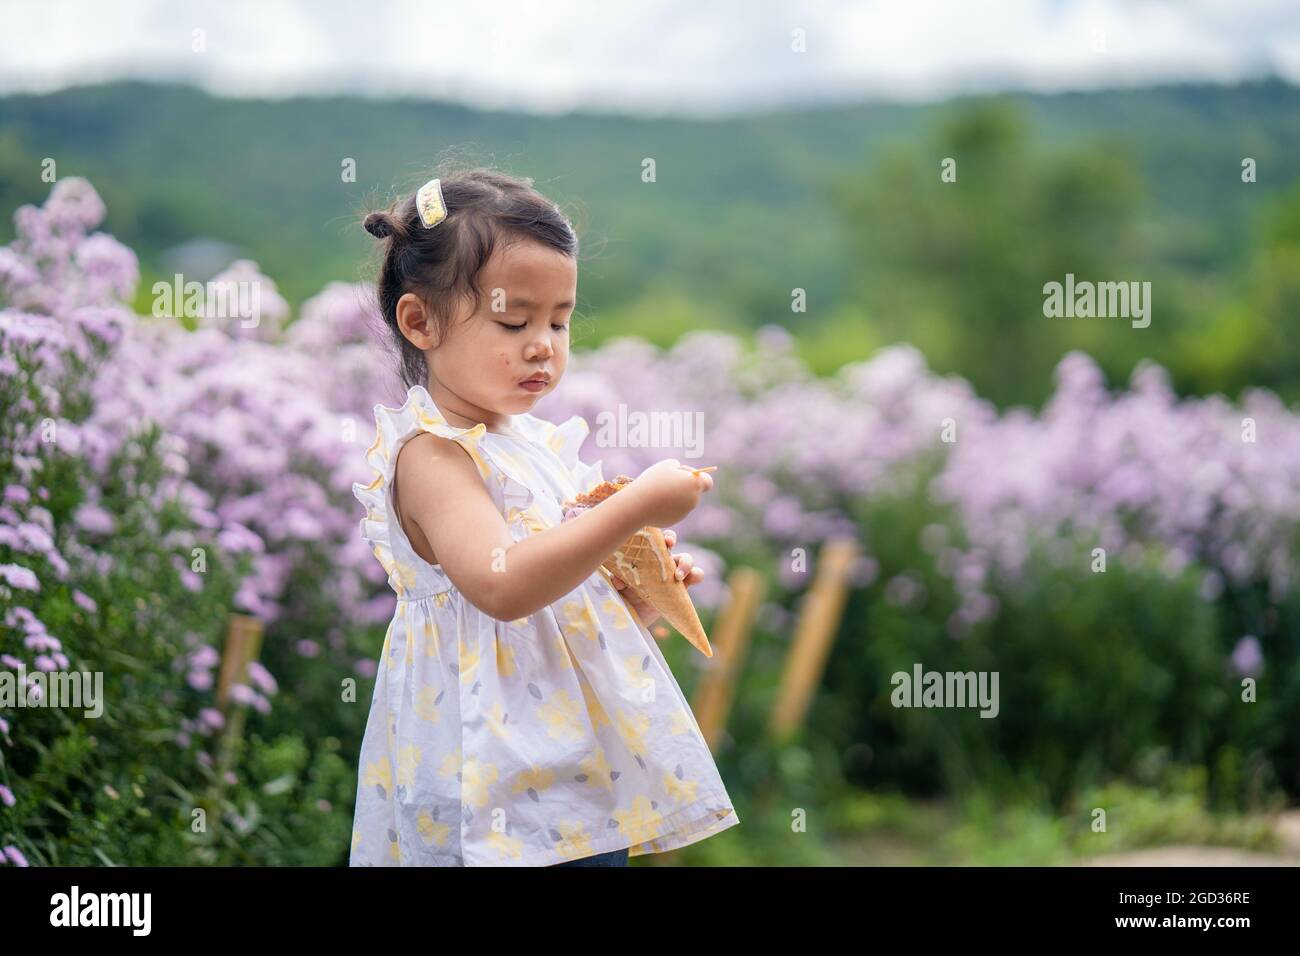 Adorable little girl from Thailand eating a snack in the meadow of lavender flowers Stock Photo